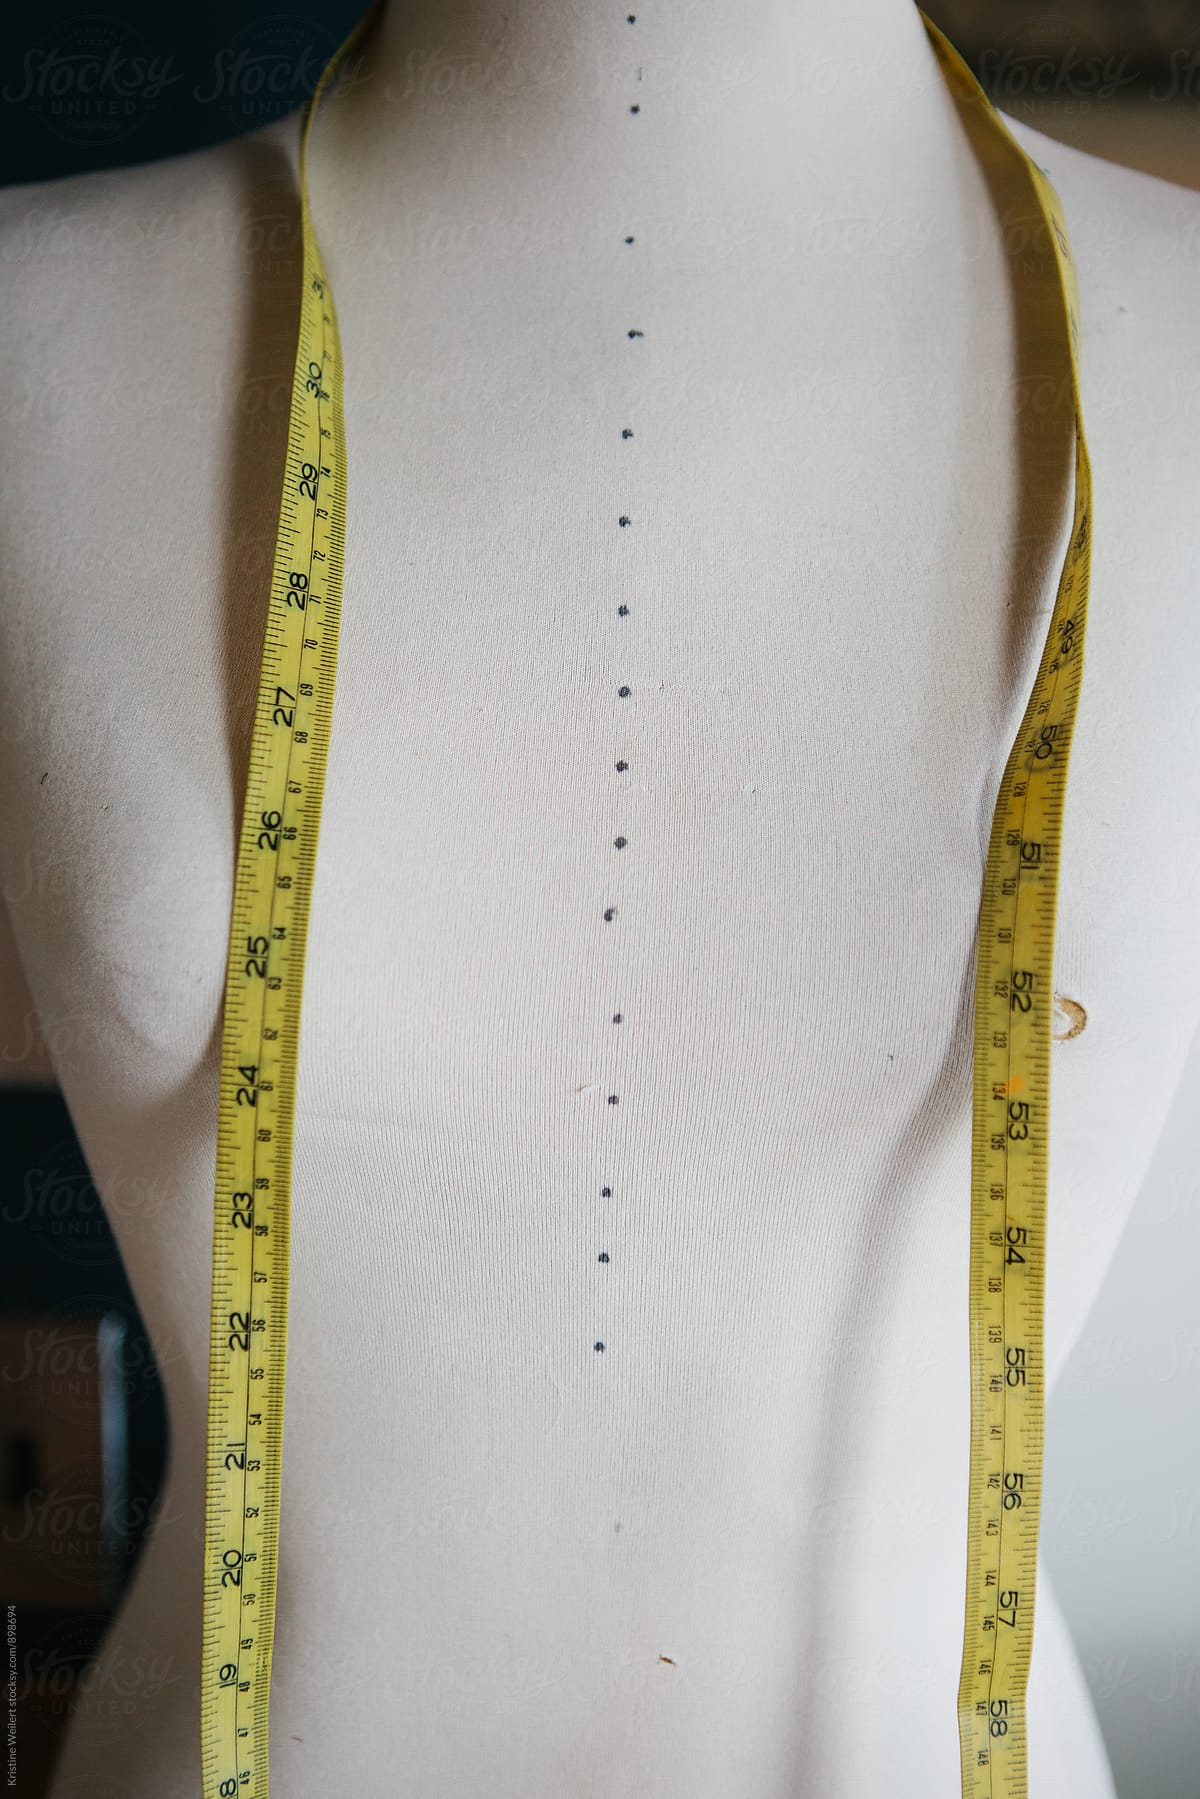 Dress Form with a Tape Measurer